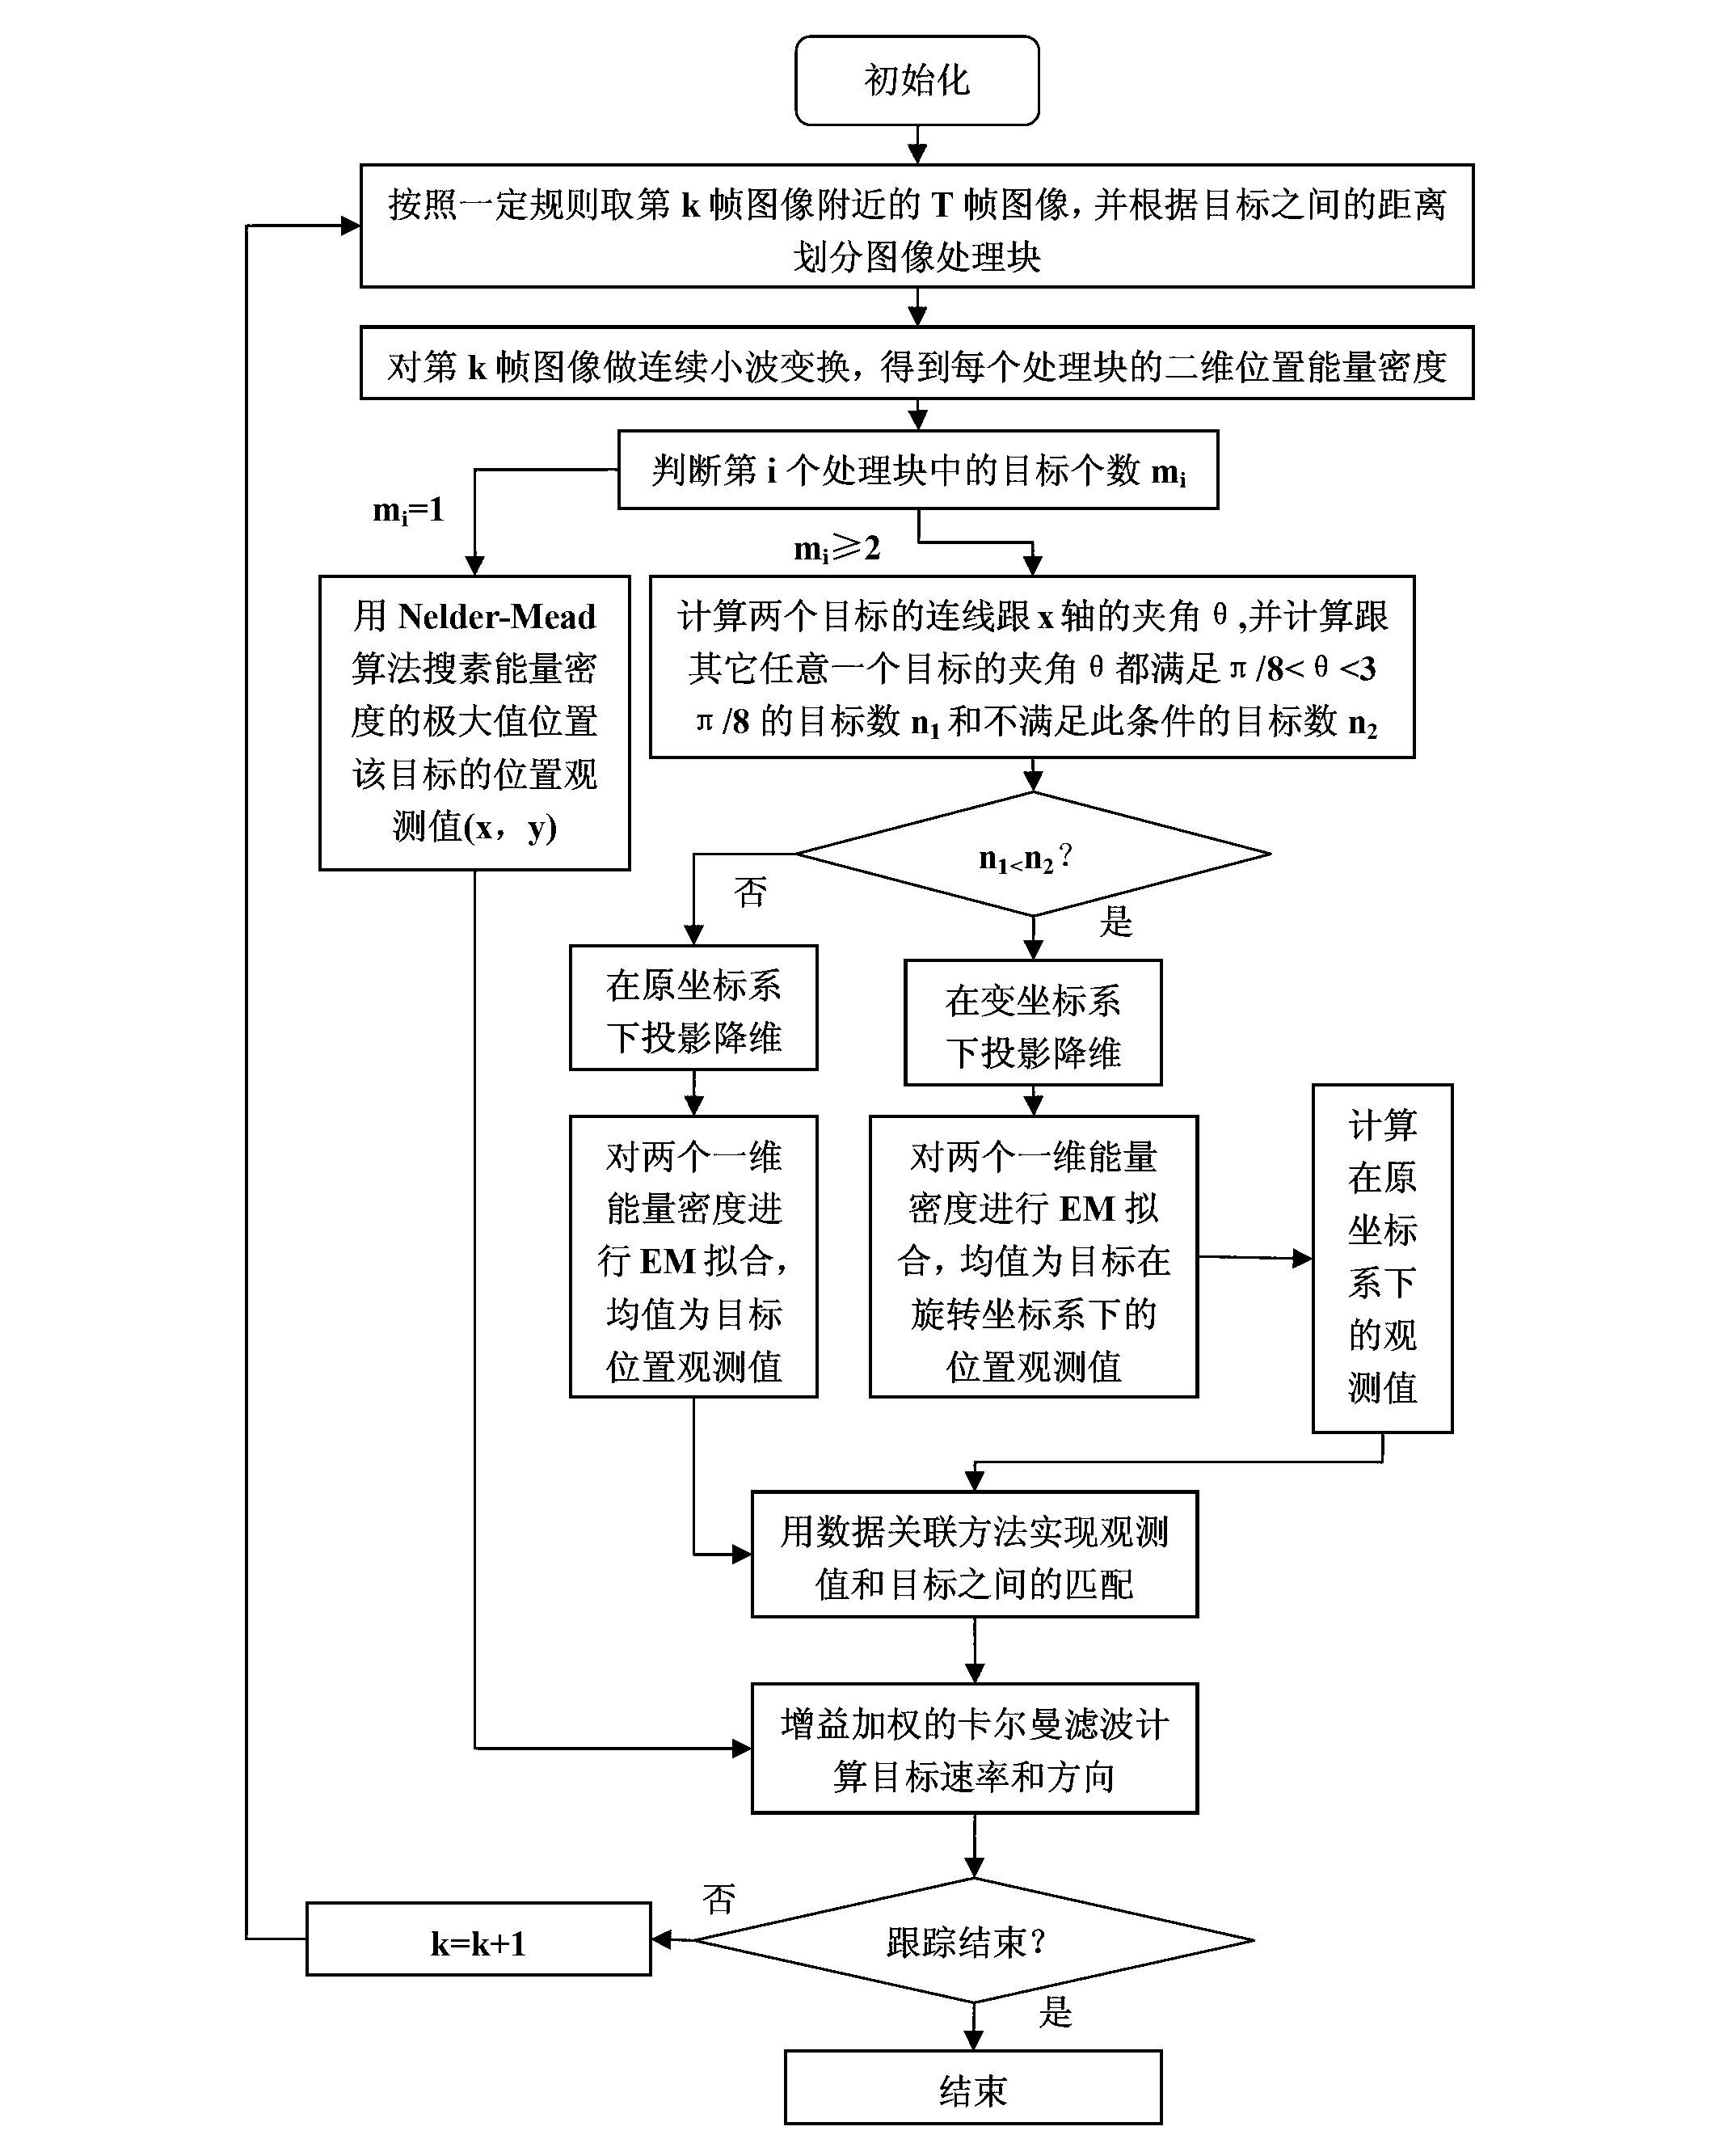 Multi-target tracking method based on variable processing windows and variable coordinate systems